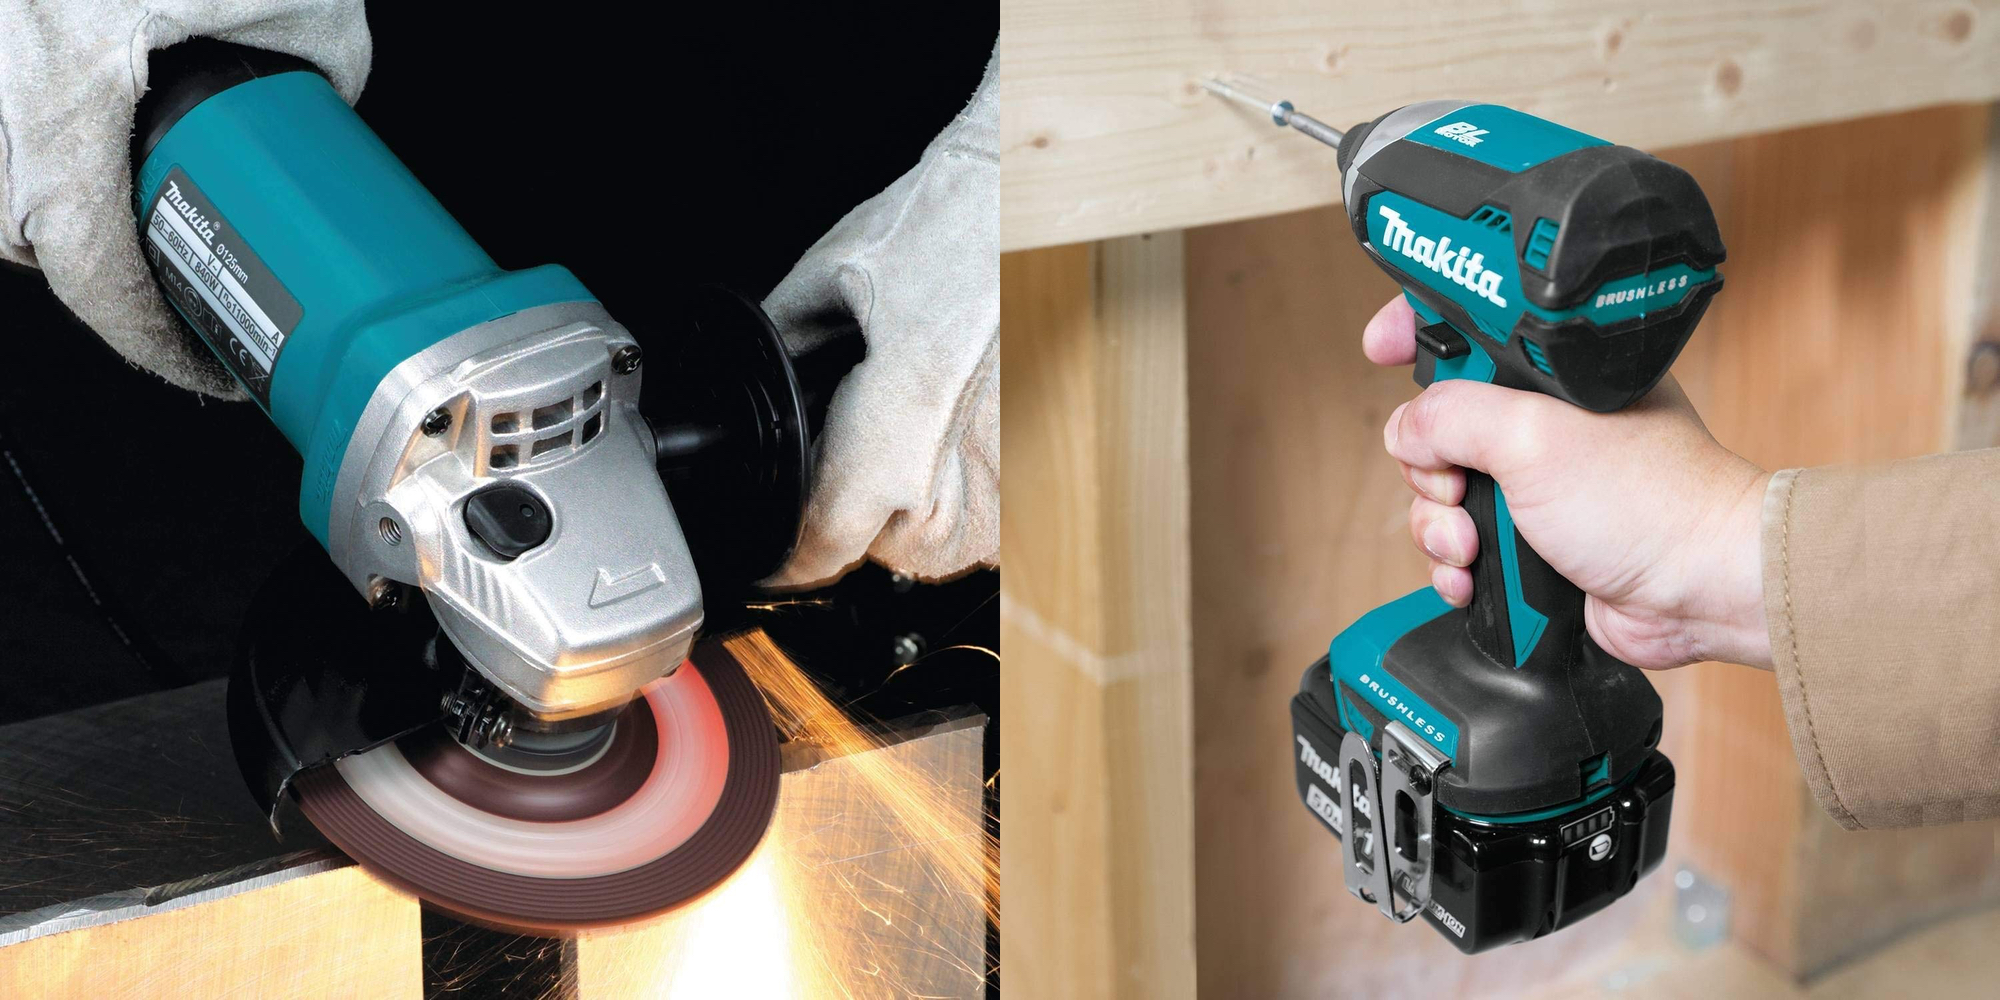 Udelukke Overflod grammatik Save $25 when you spend $100 or more on Makita tools and accessories at  Amazon